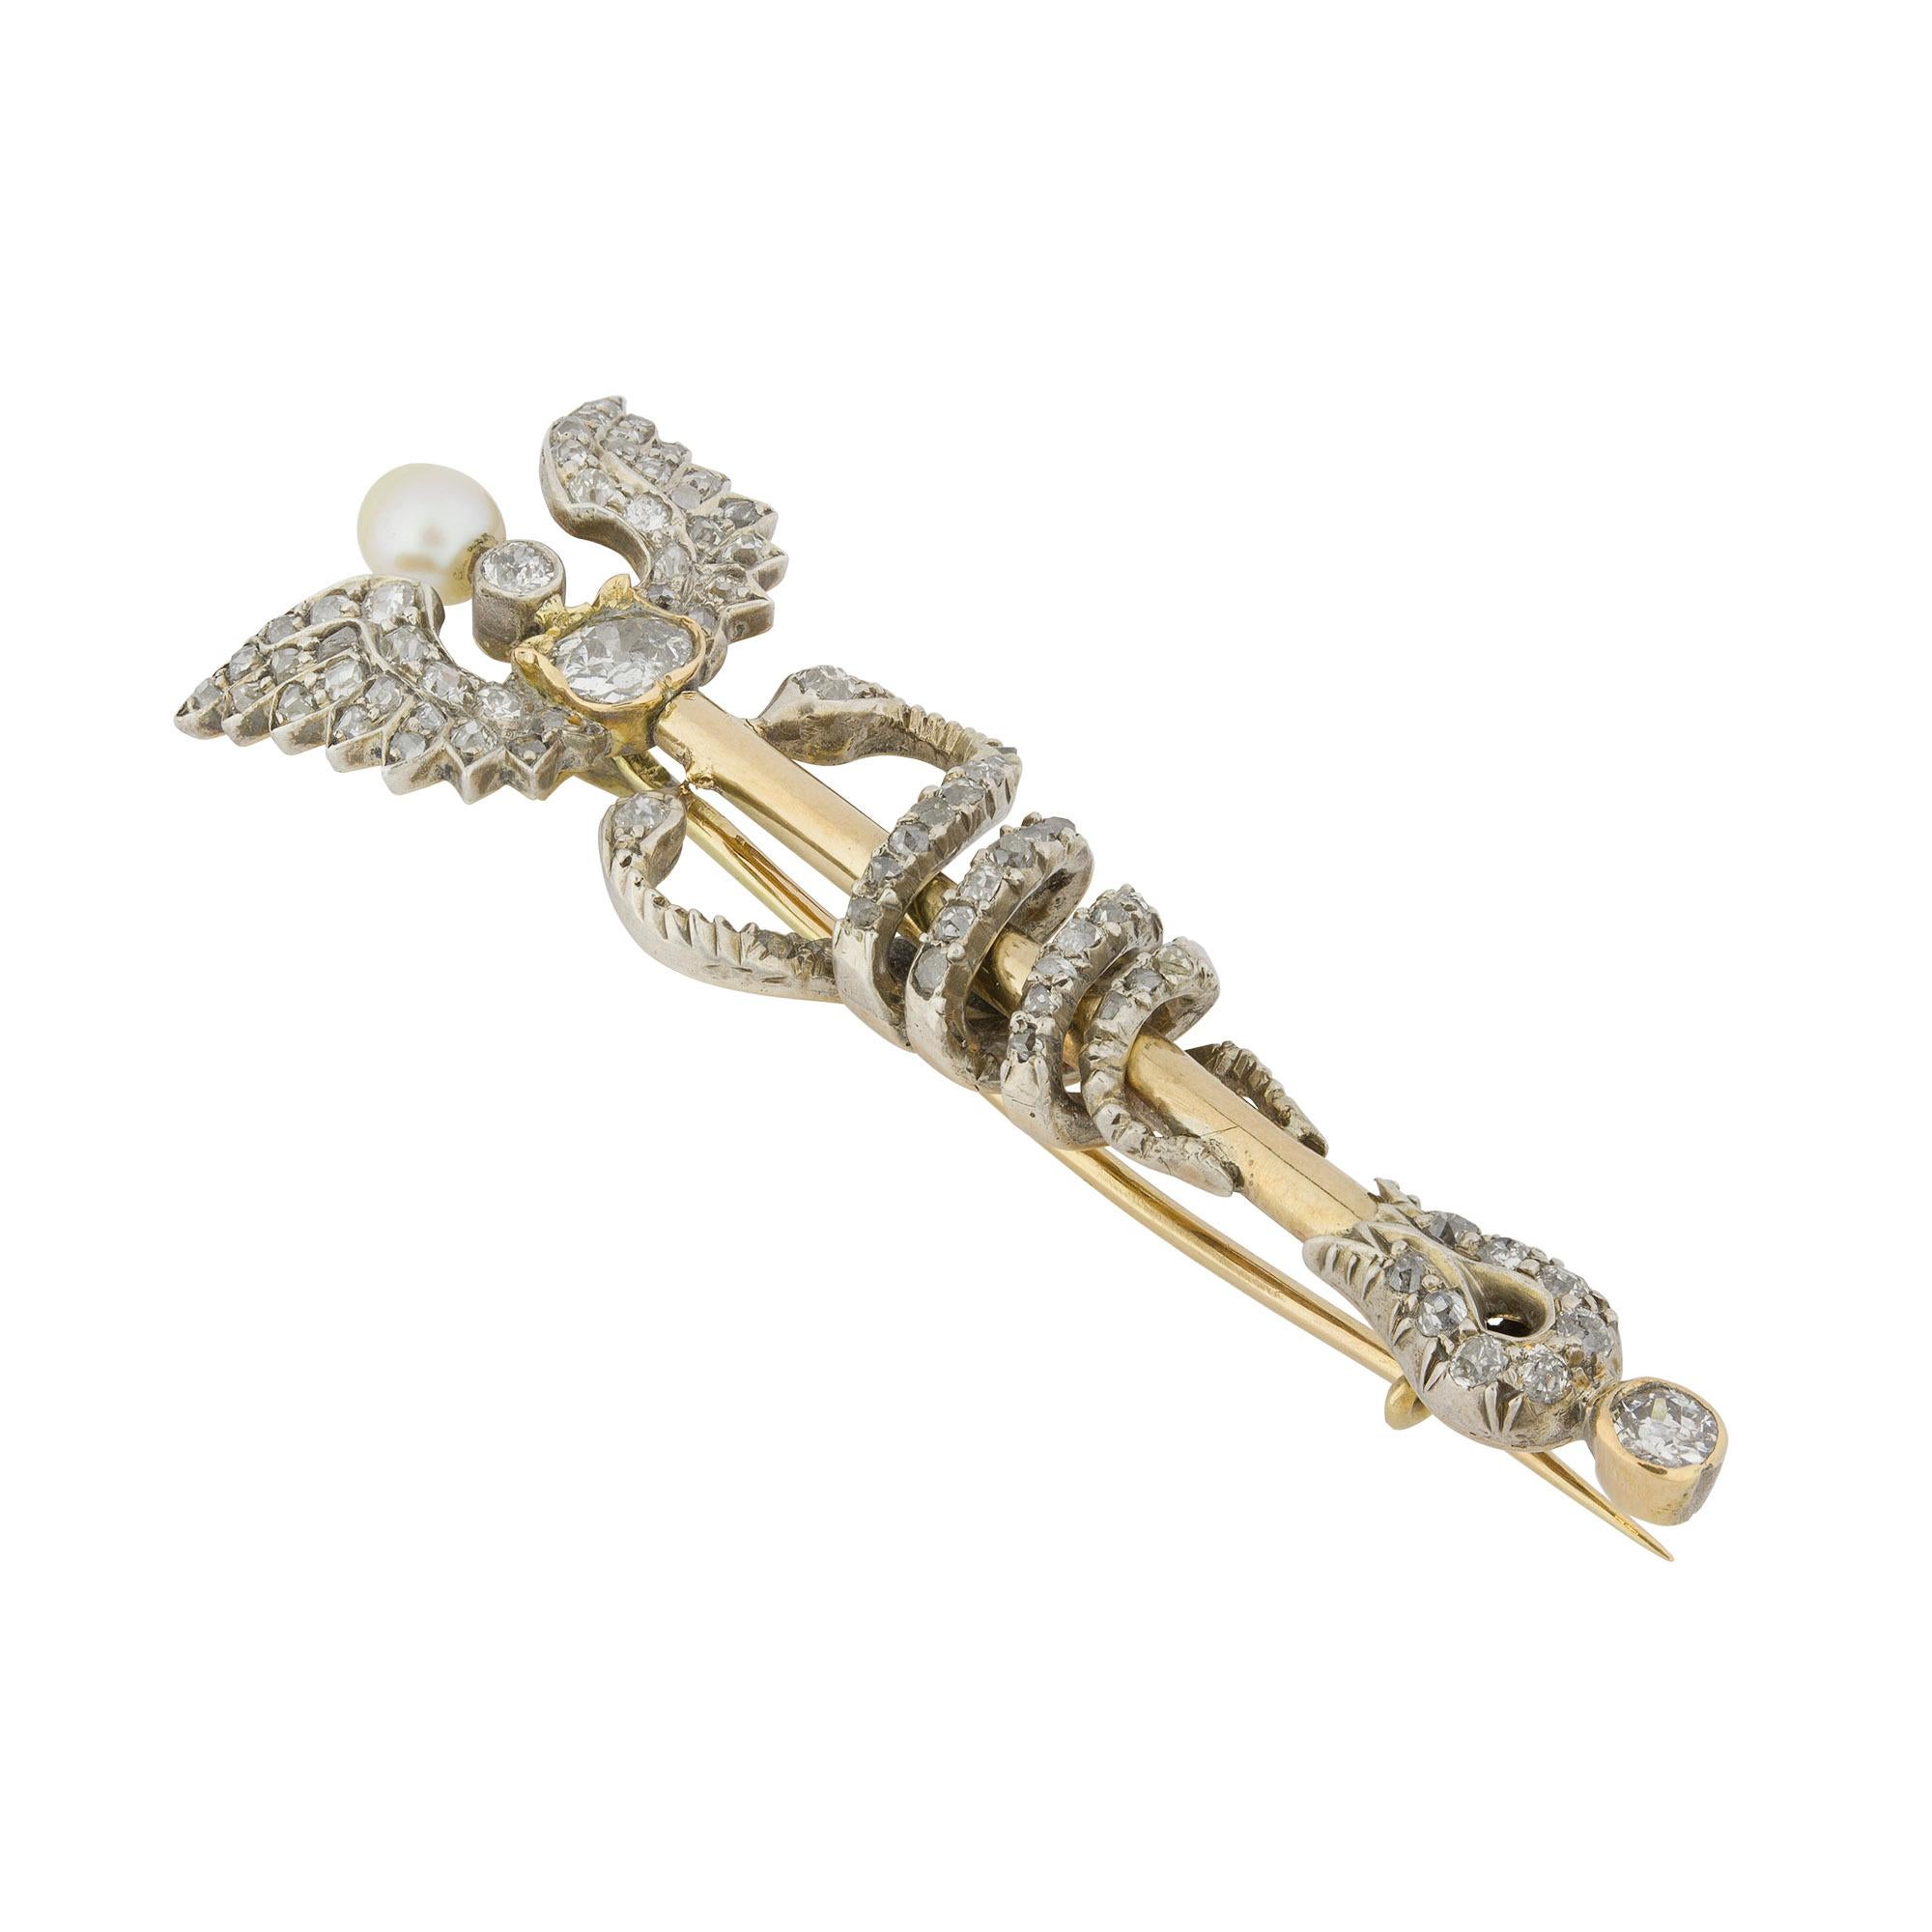 A late Victorian yellow gold and diamond Caduceus brooch, the winged staff white claw-set throughout with old brilliant-cut and rose-cut diamonds, a natural pearl raised to the centre, two diamond-set serpents entwined around the staff, all white